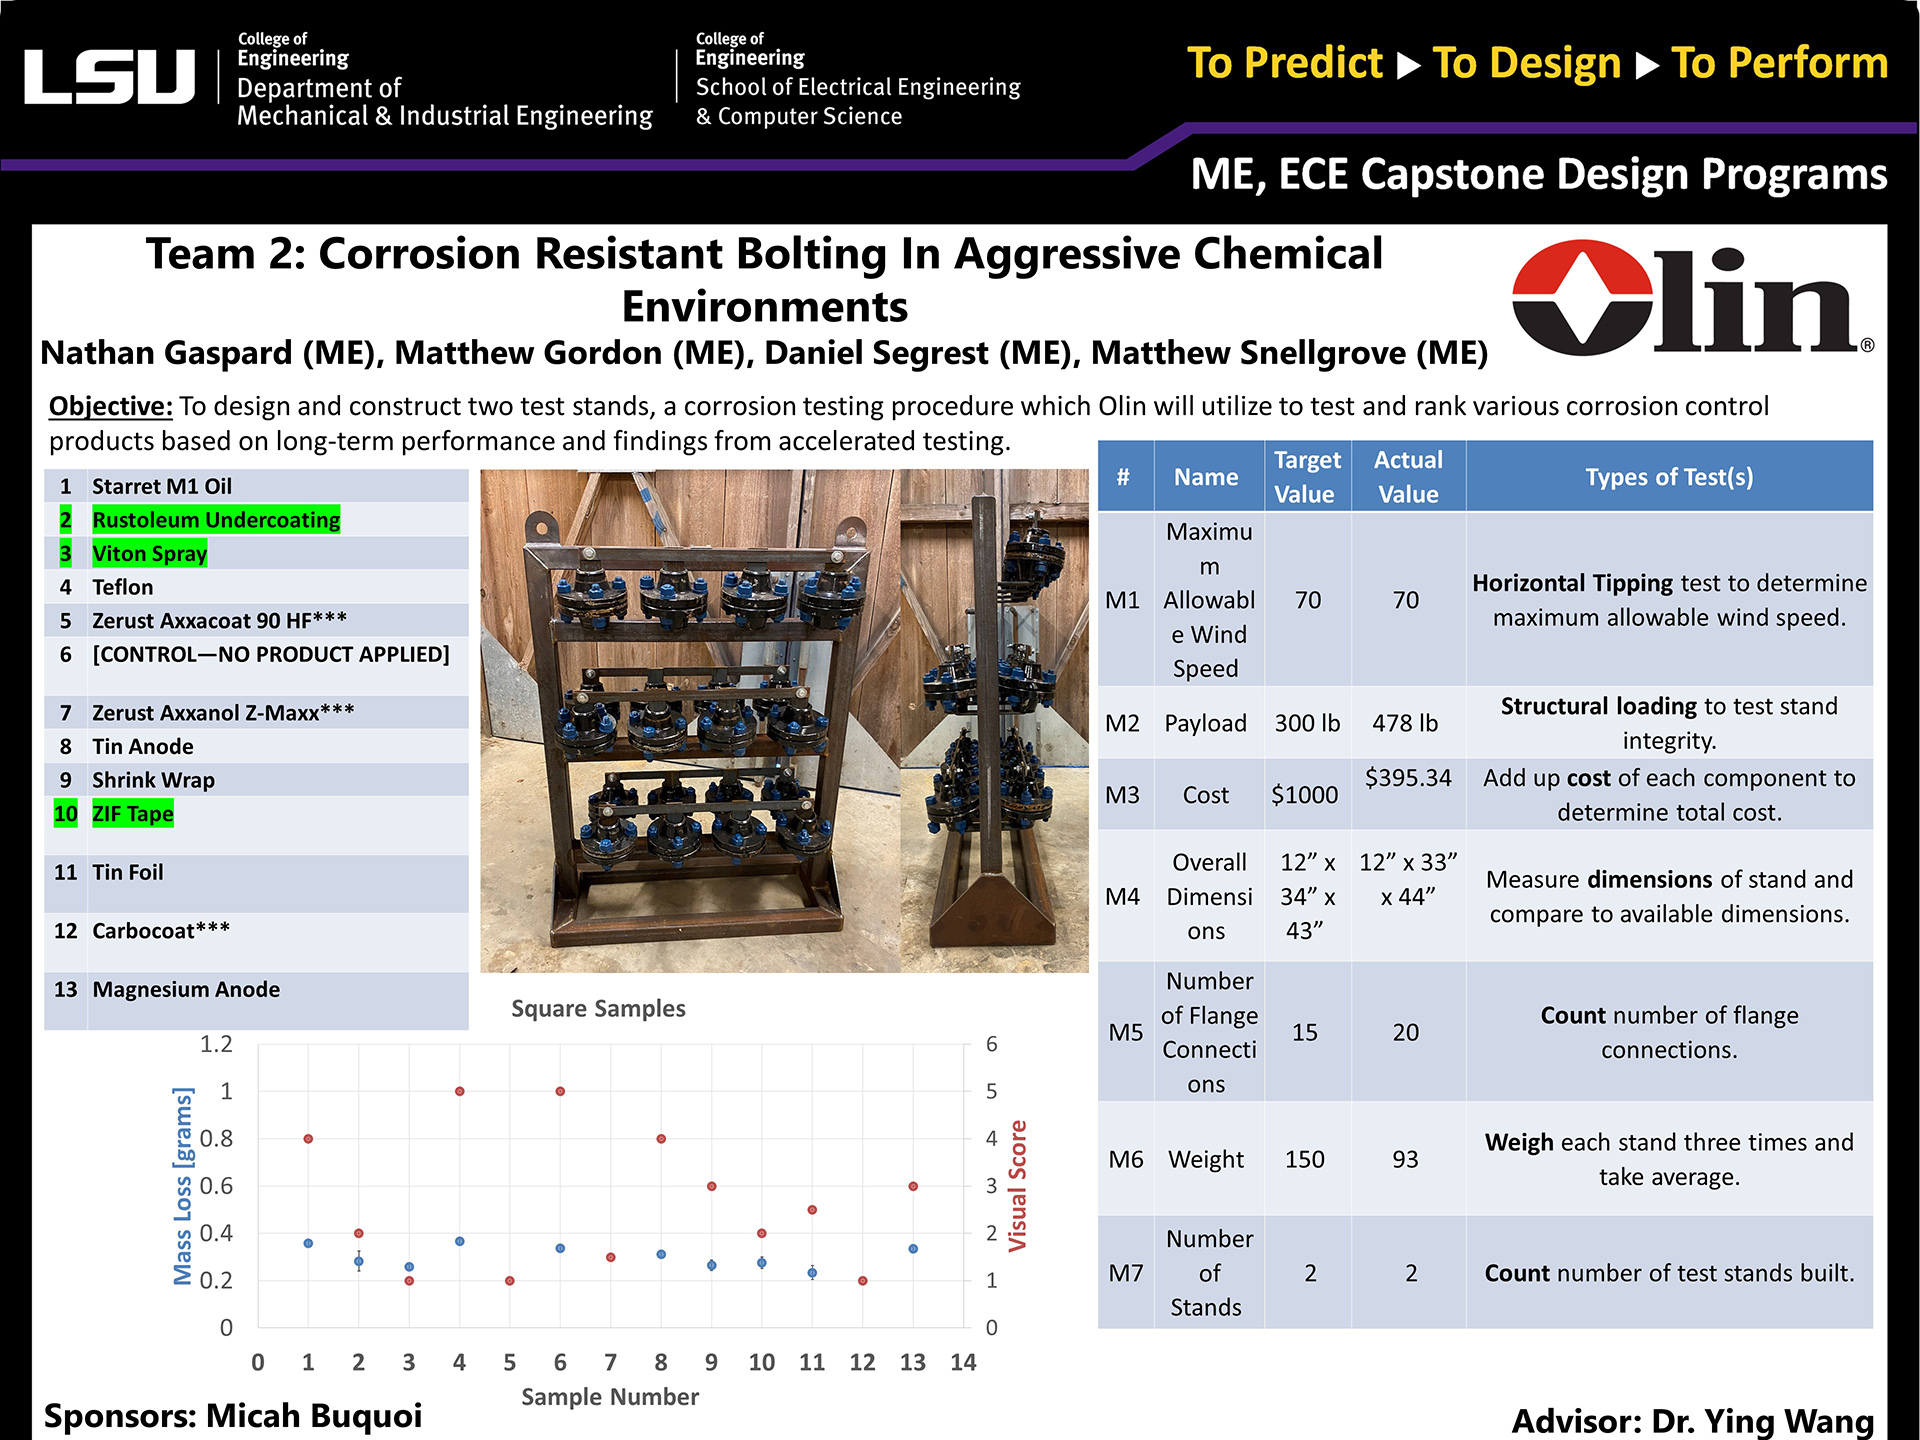 Project 2: Corrosion Resistant Bolting in Aggressive Chemical Environments (2022)